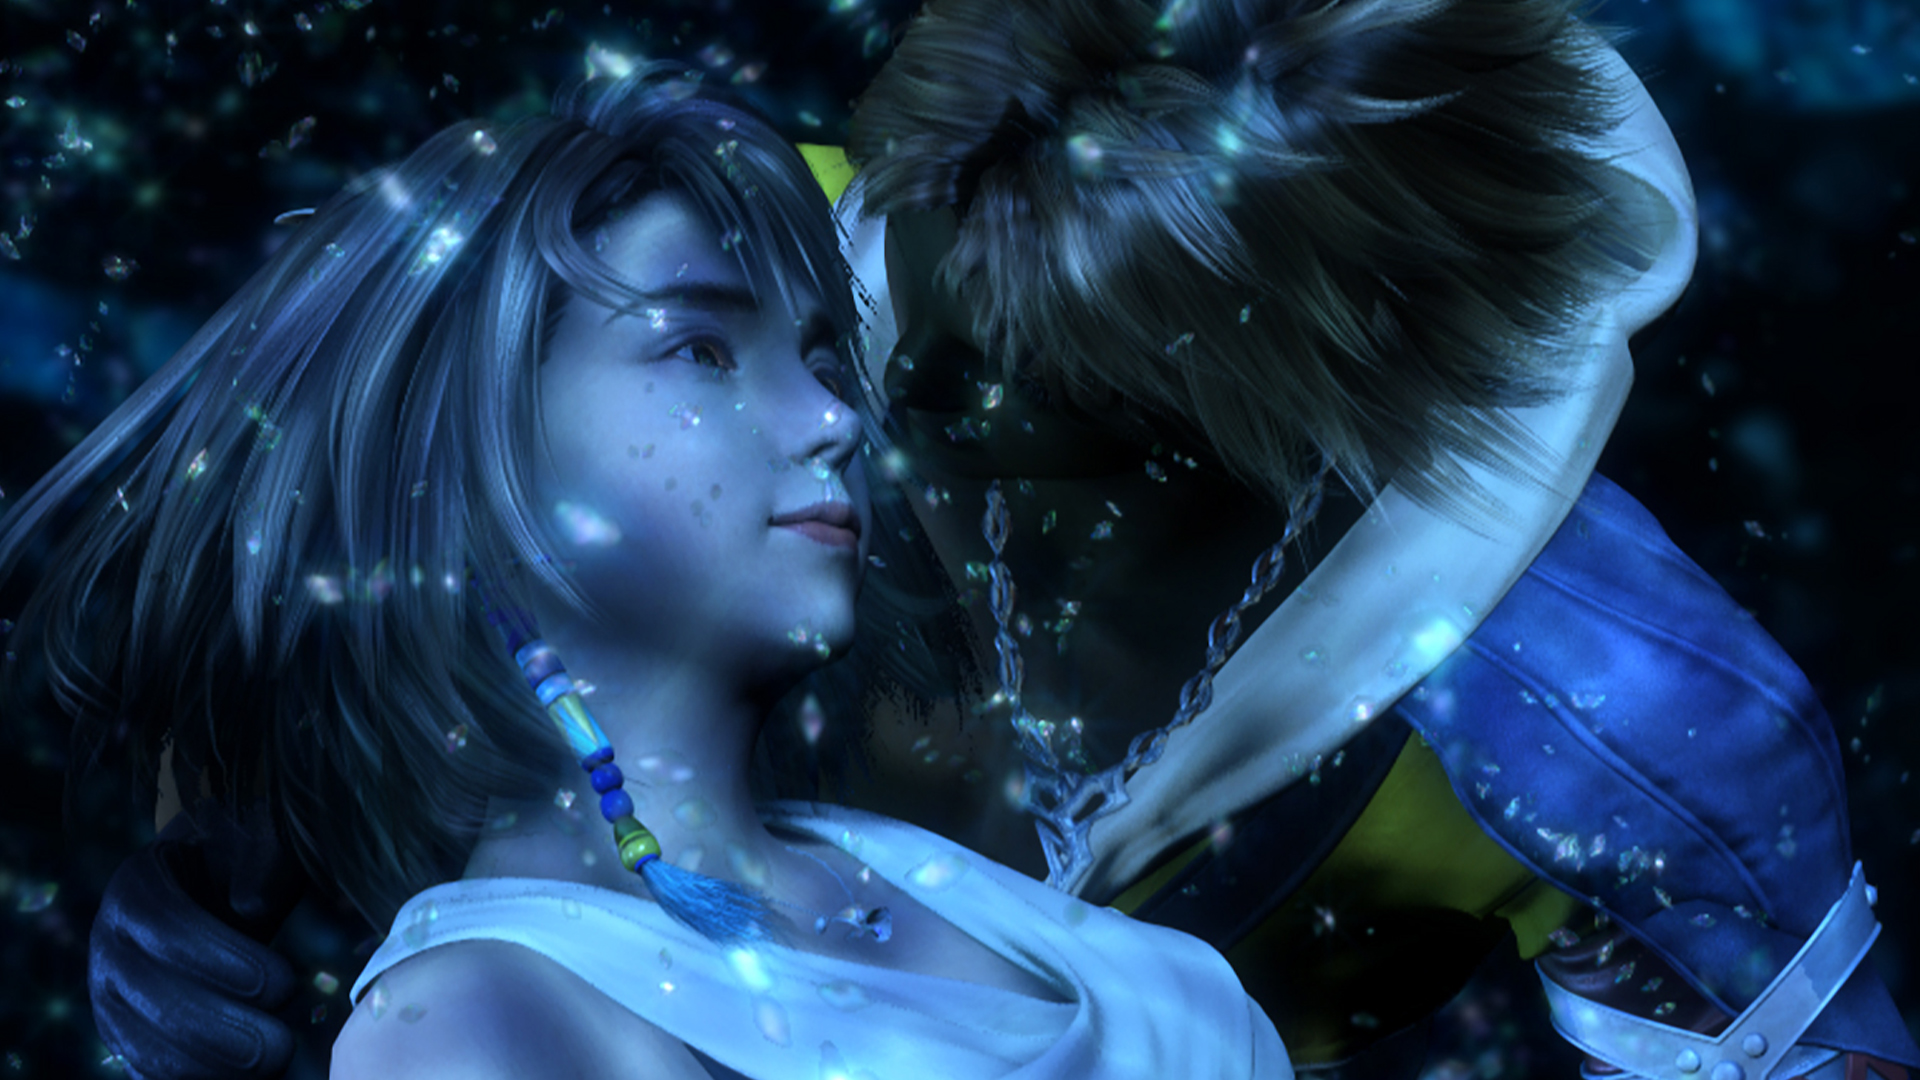 The Final Fantasy X Update Preventing Offline Play Has Been Reversed Pcgamesn